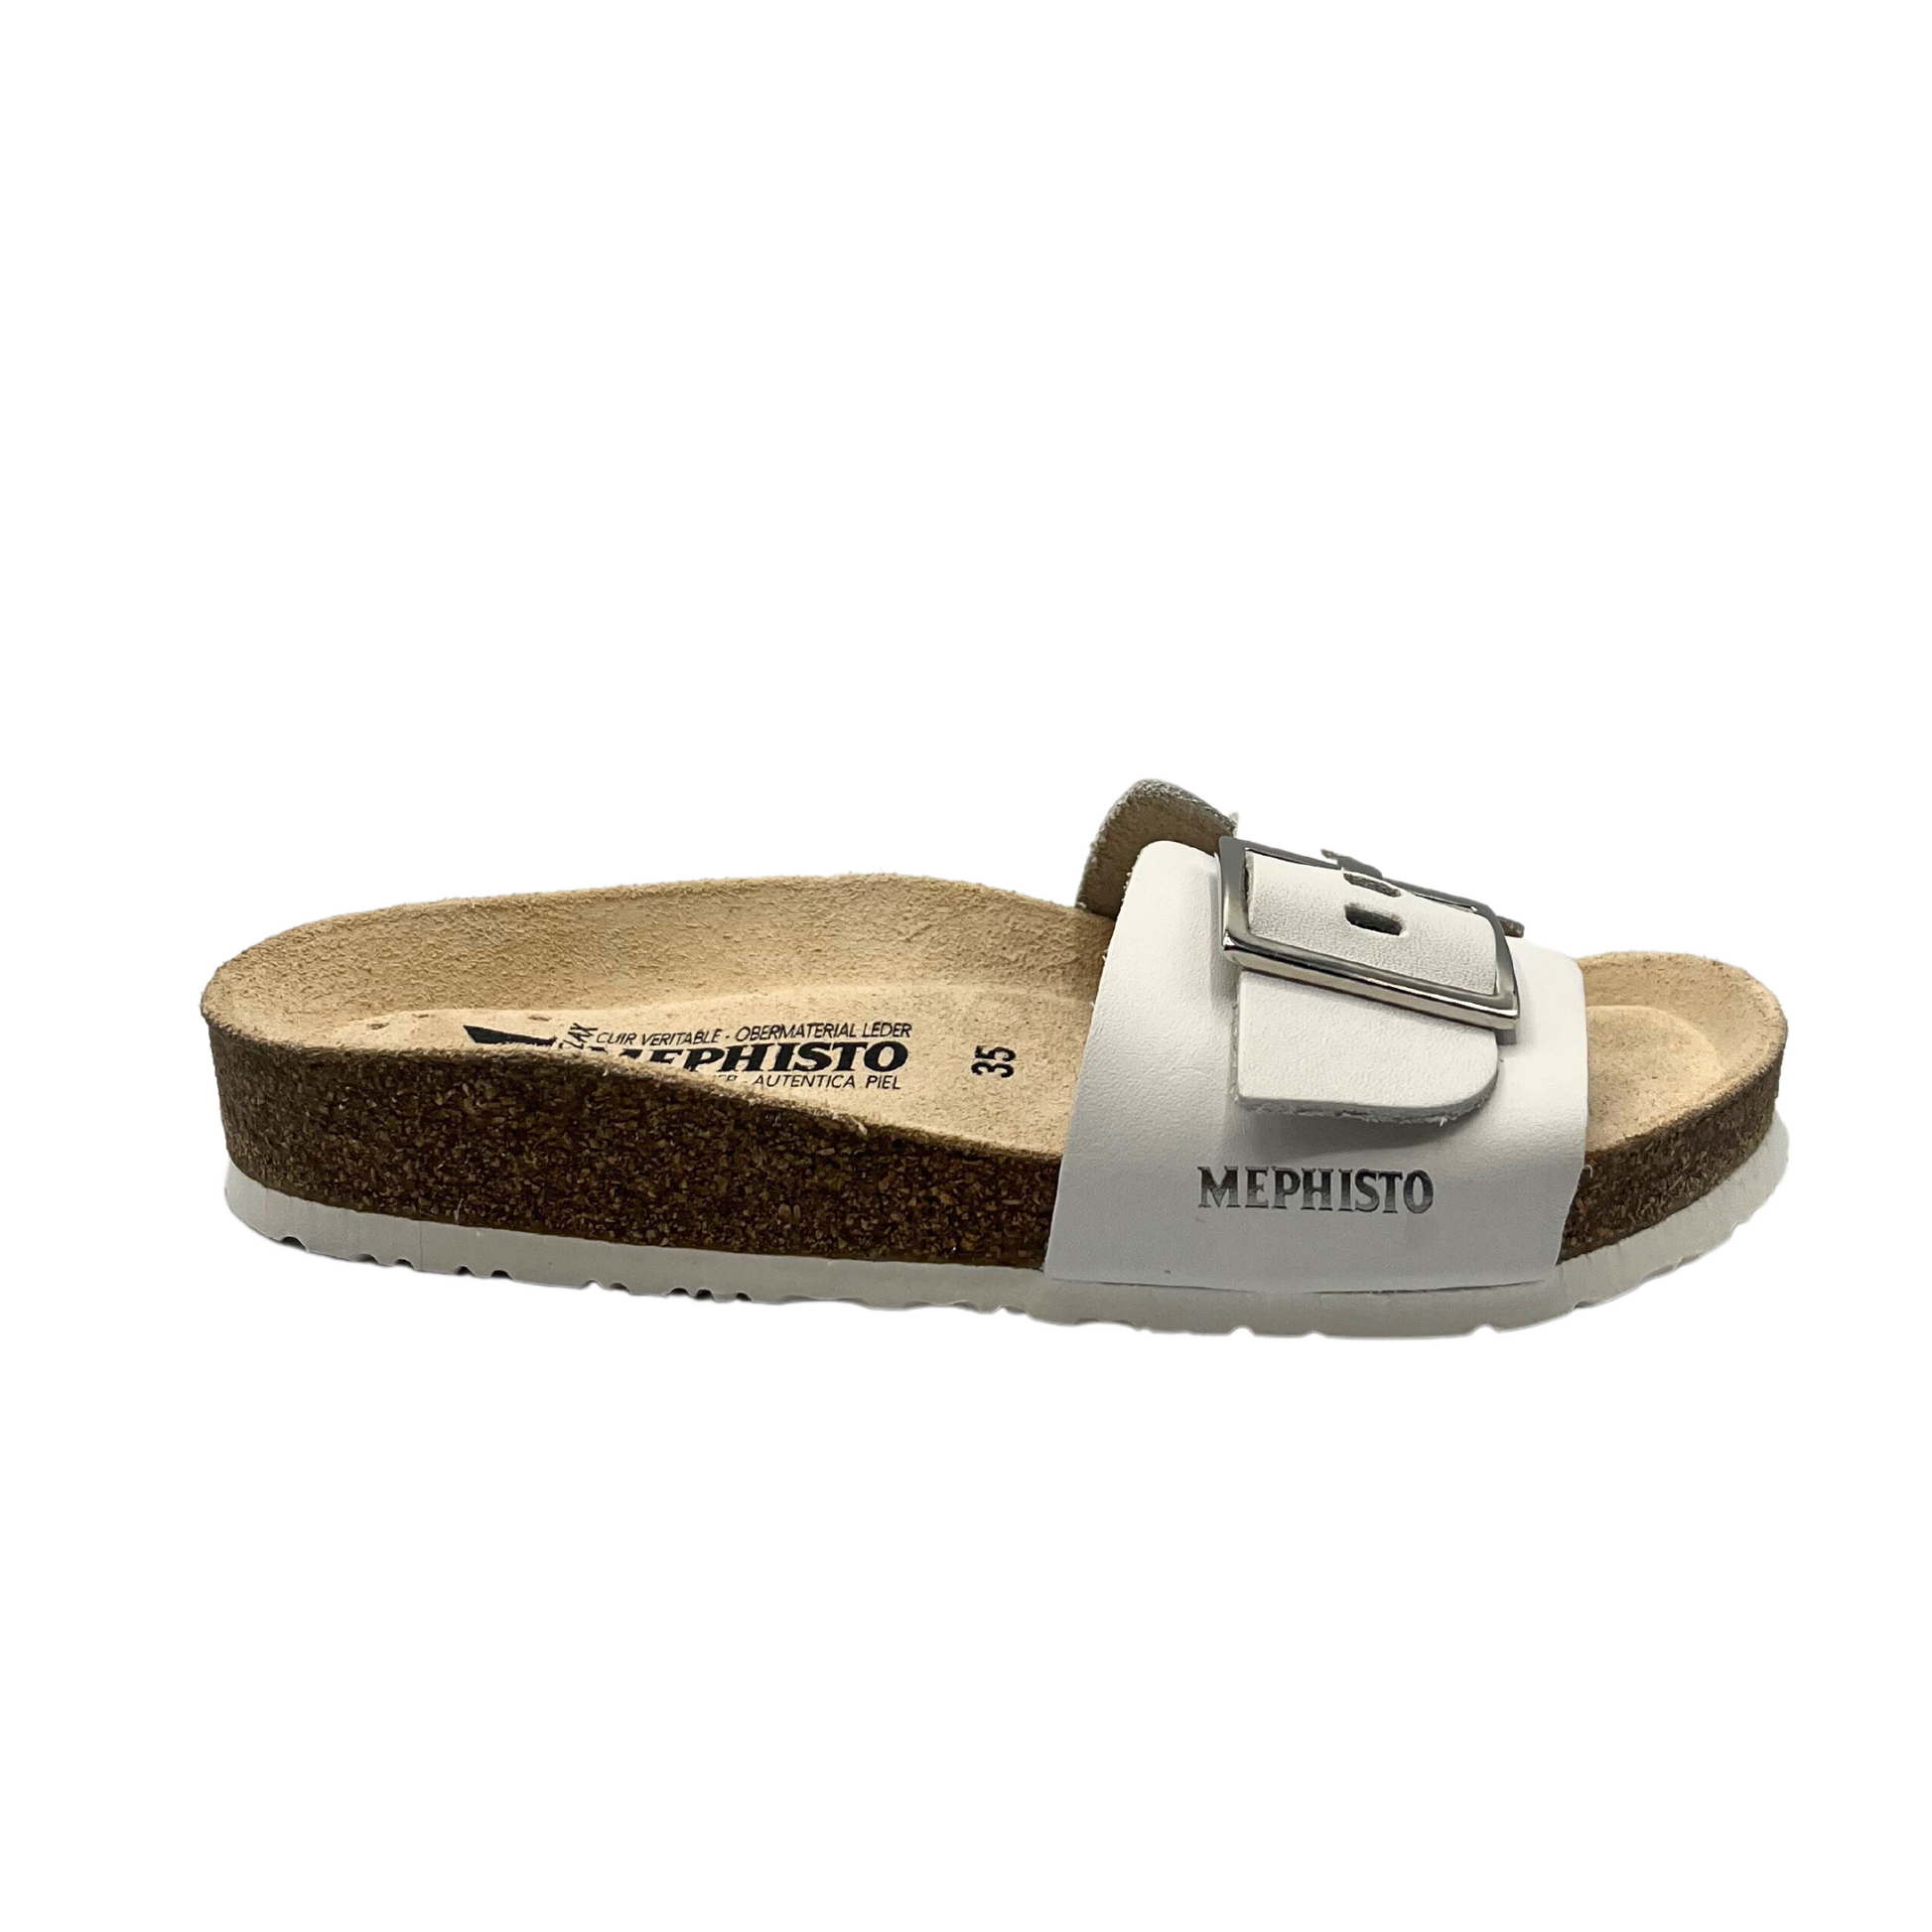 Outside view of a white leather mule walking sandal hi-lighting the ergonimic leather footbed